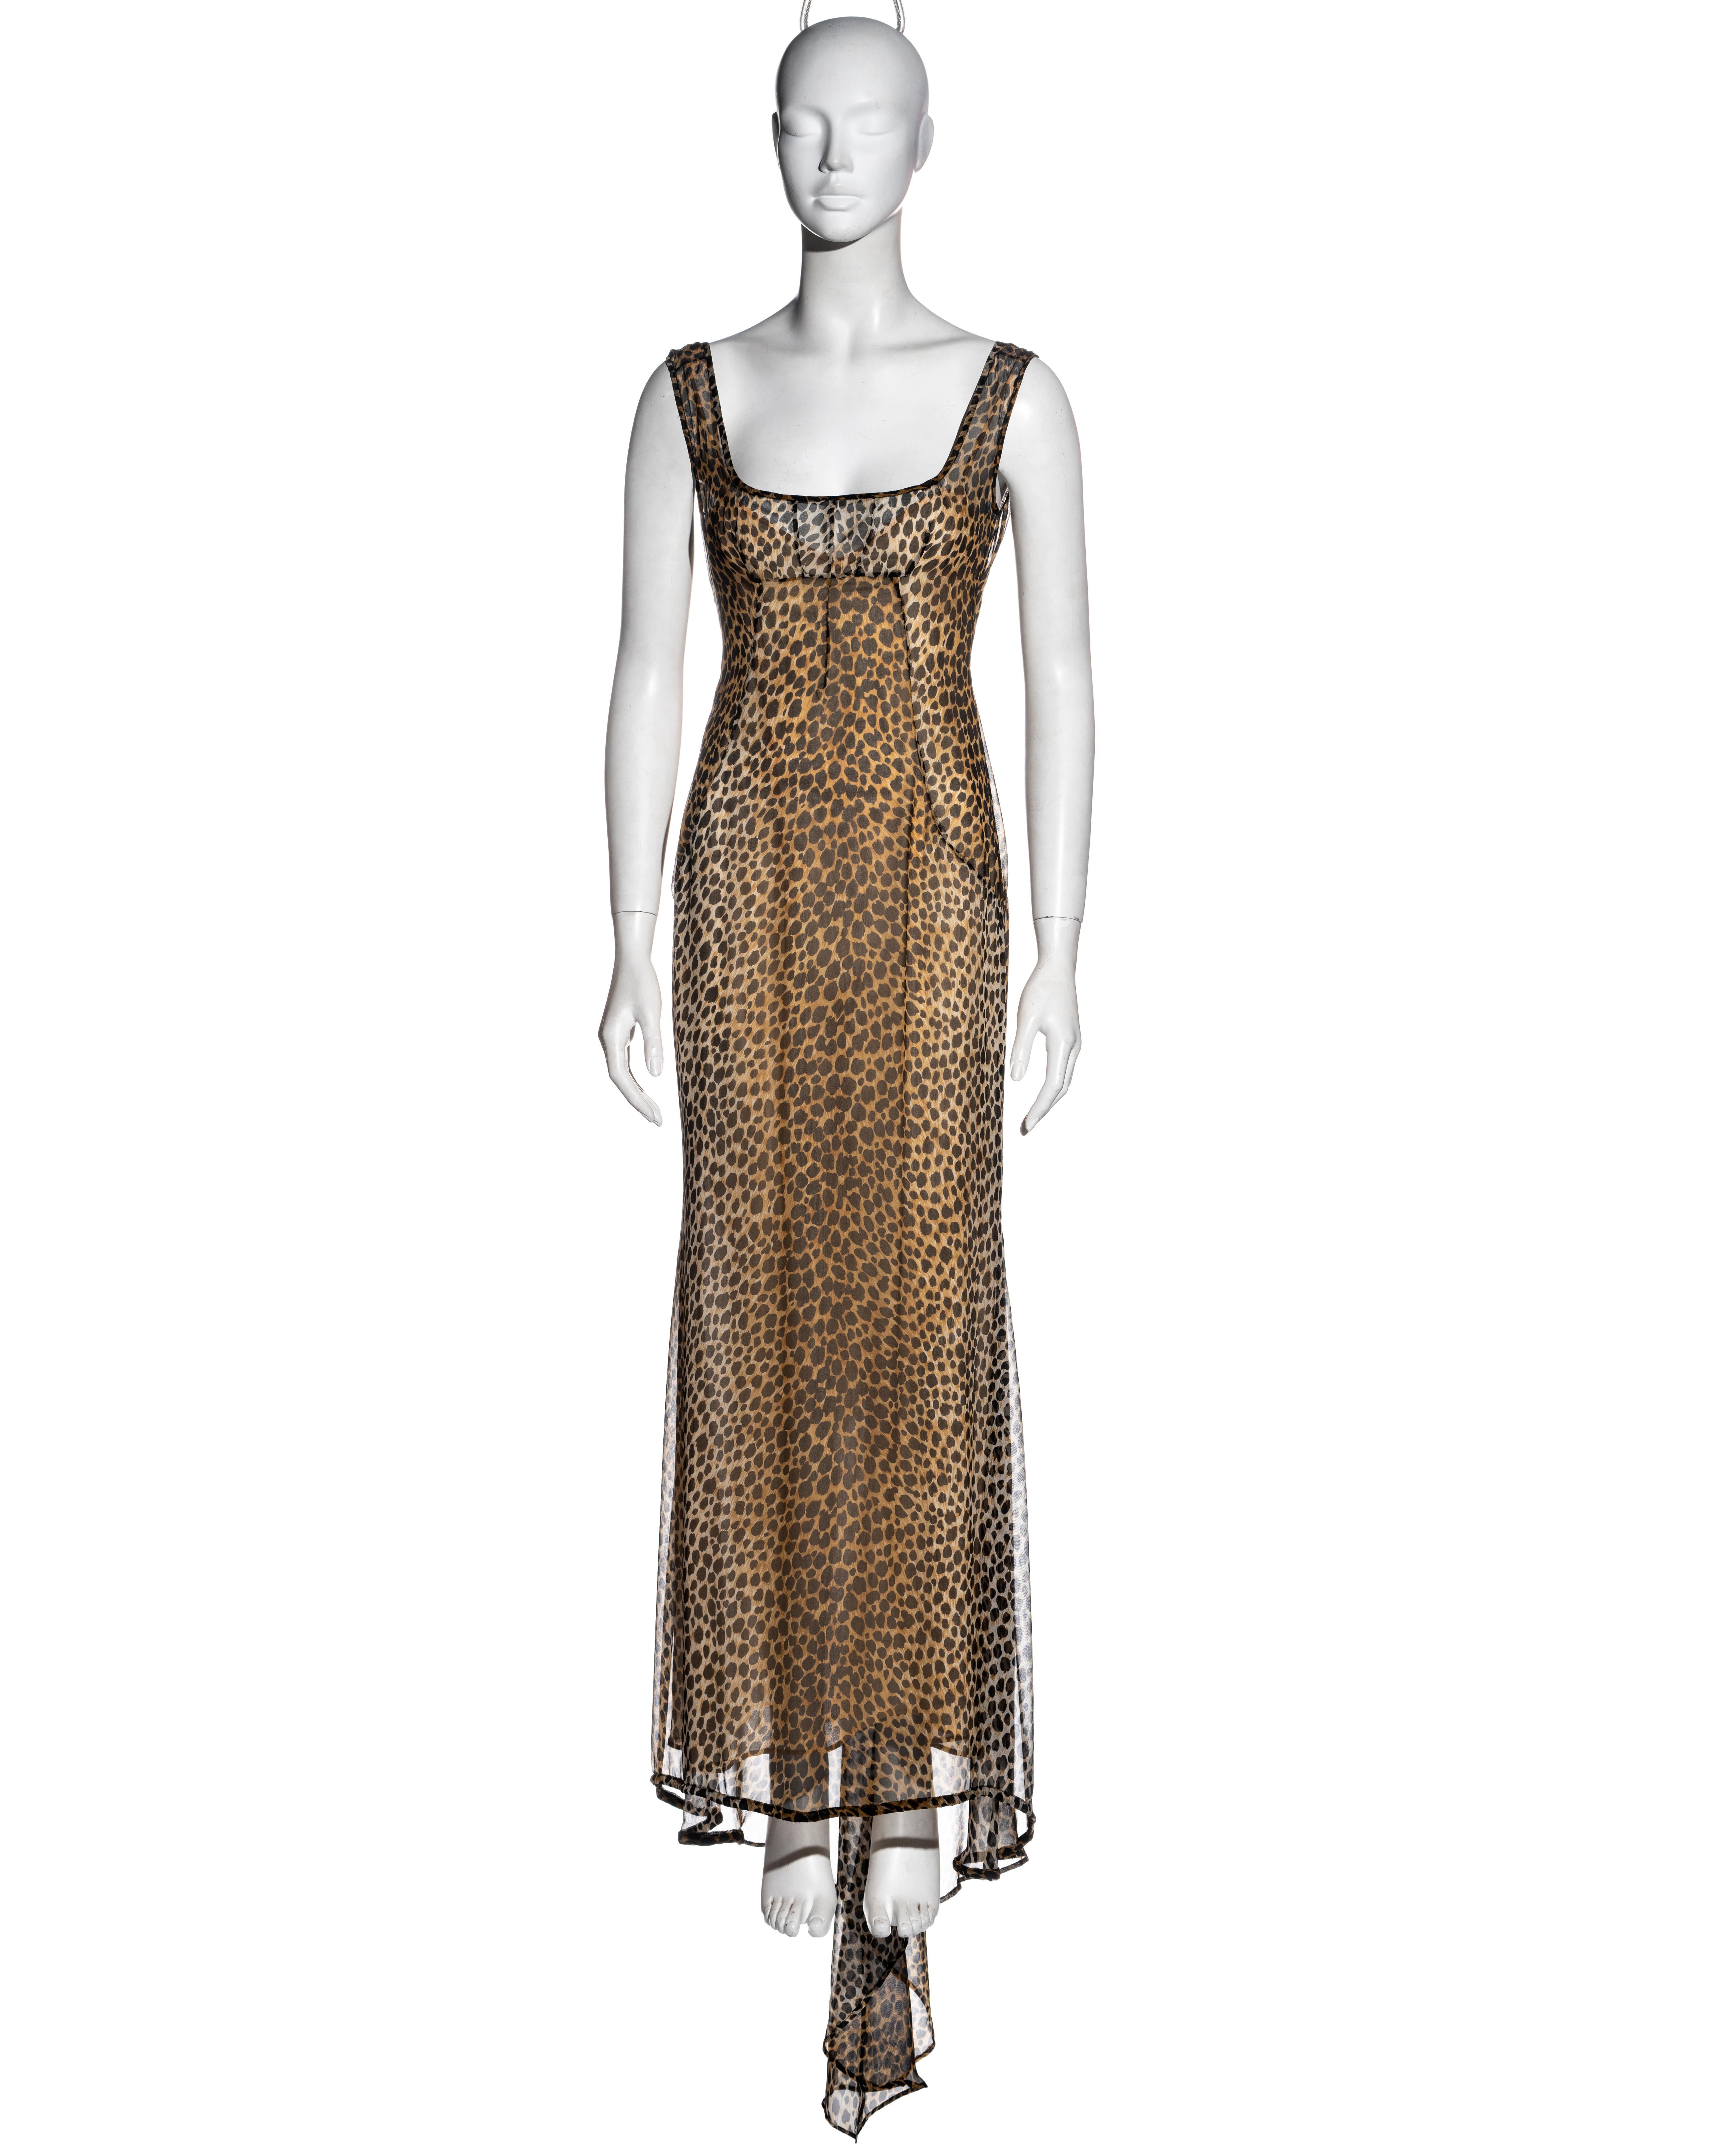 ▪ Dolce & Gabbana silk cheetah-print evening slip dress
▪ Nude under dress attached 
▪ Square neckline
▪ Long ties at the waist 
▪ Floor-length skirt with train
▪ IT 40 - FR 36 - UK 8 
▪ Fall-Winter 1996
▪ 100% Silk 
▪ Made in Italy